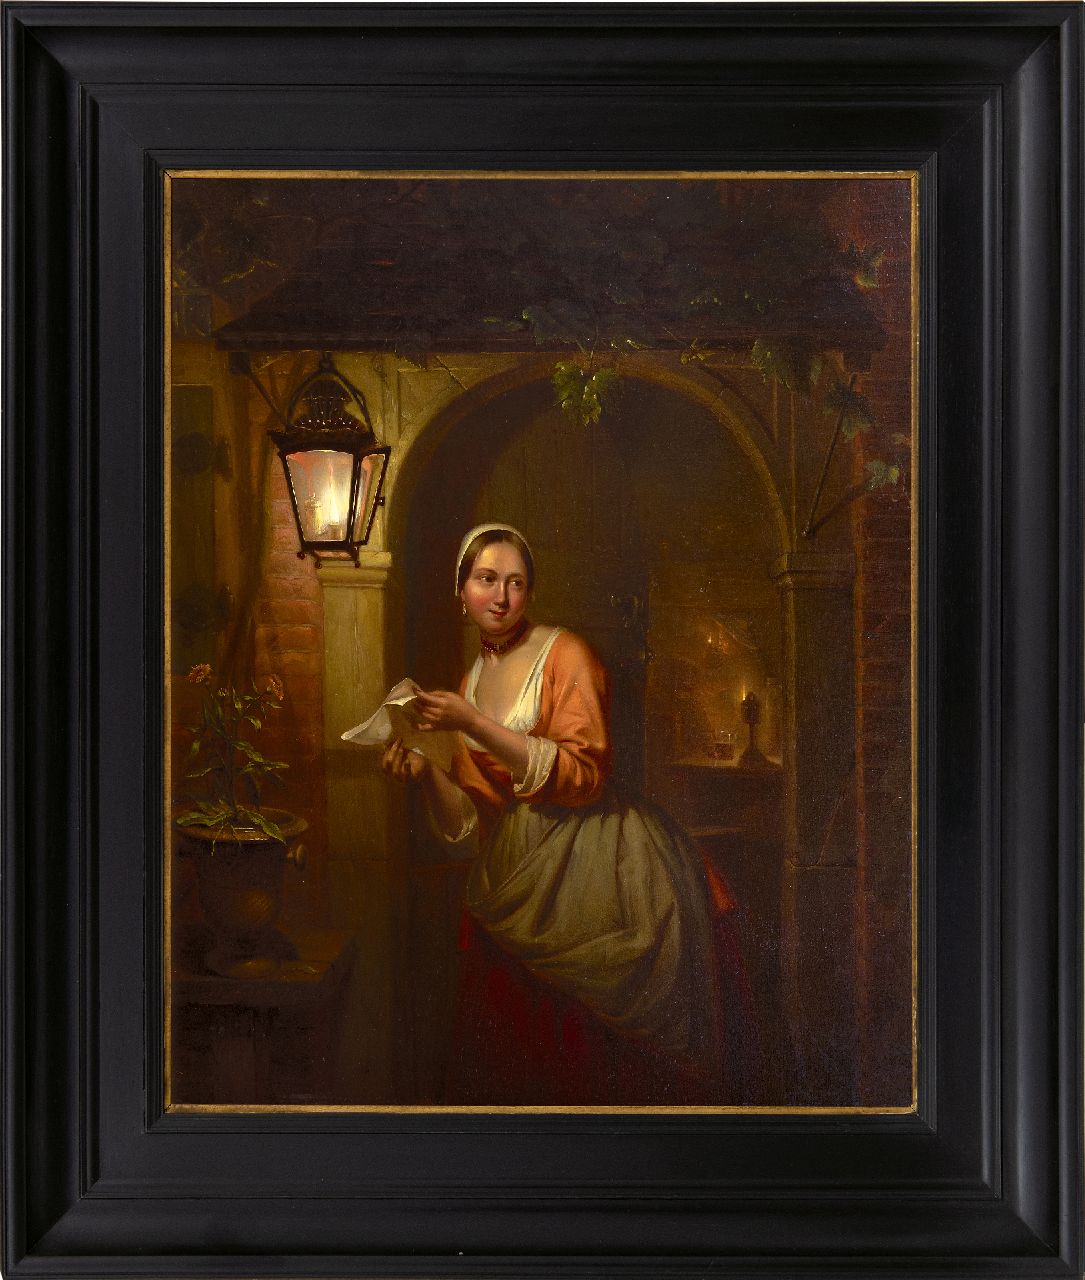 Kiers P.  | Petrus Kiers, The letter, oil on panel 47.2 x 37.5 cm, signed l.l. and dated 1842